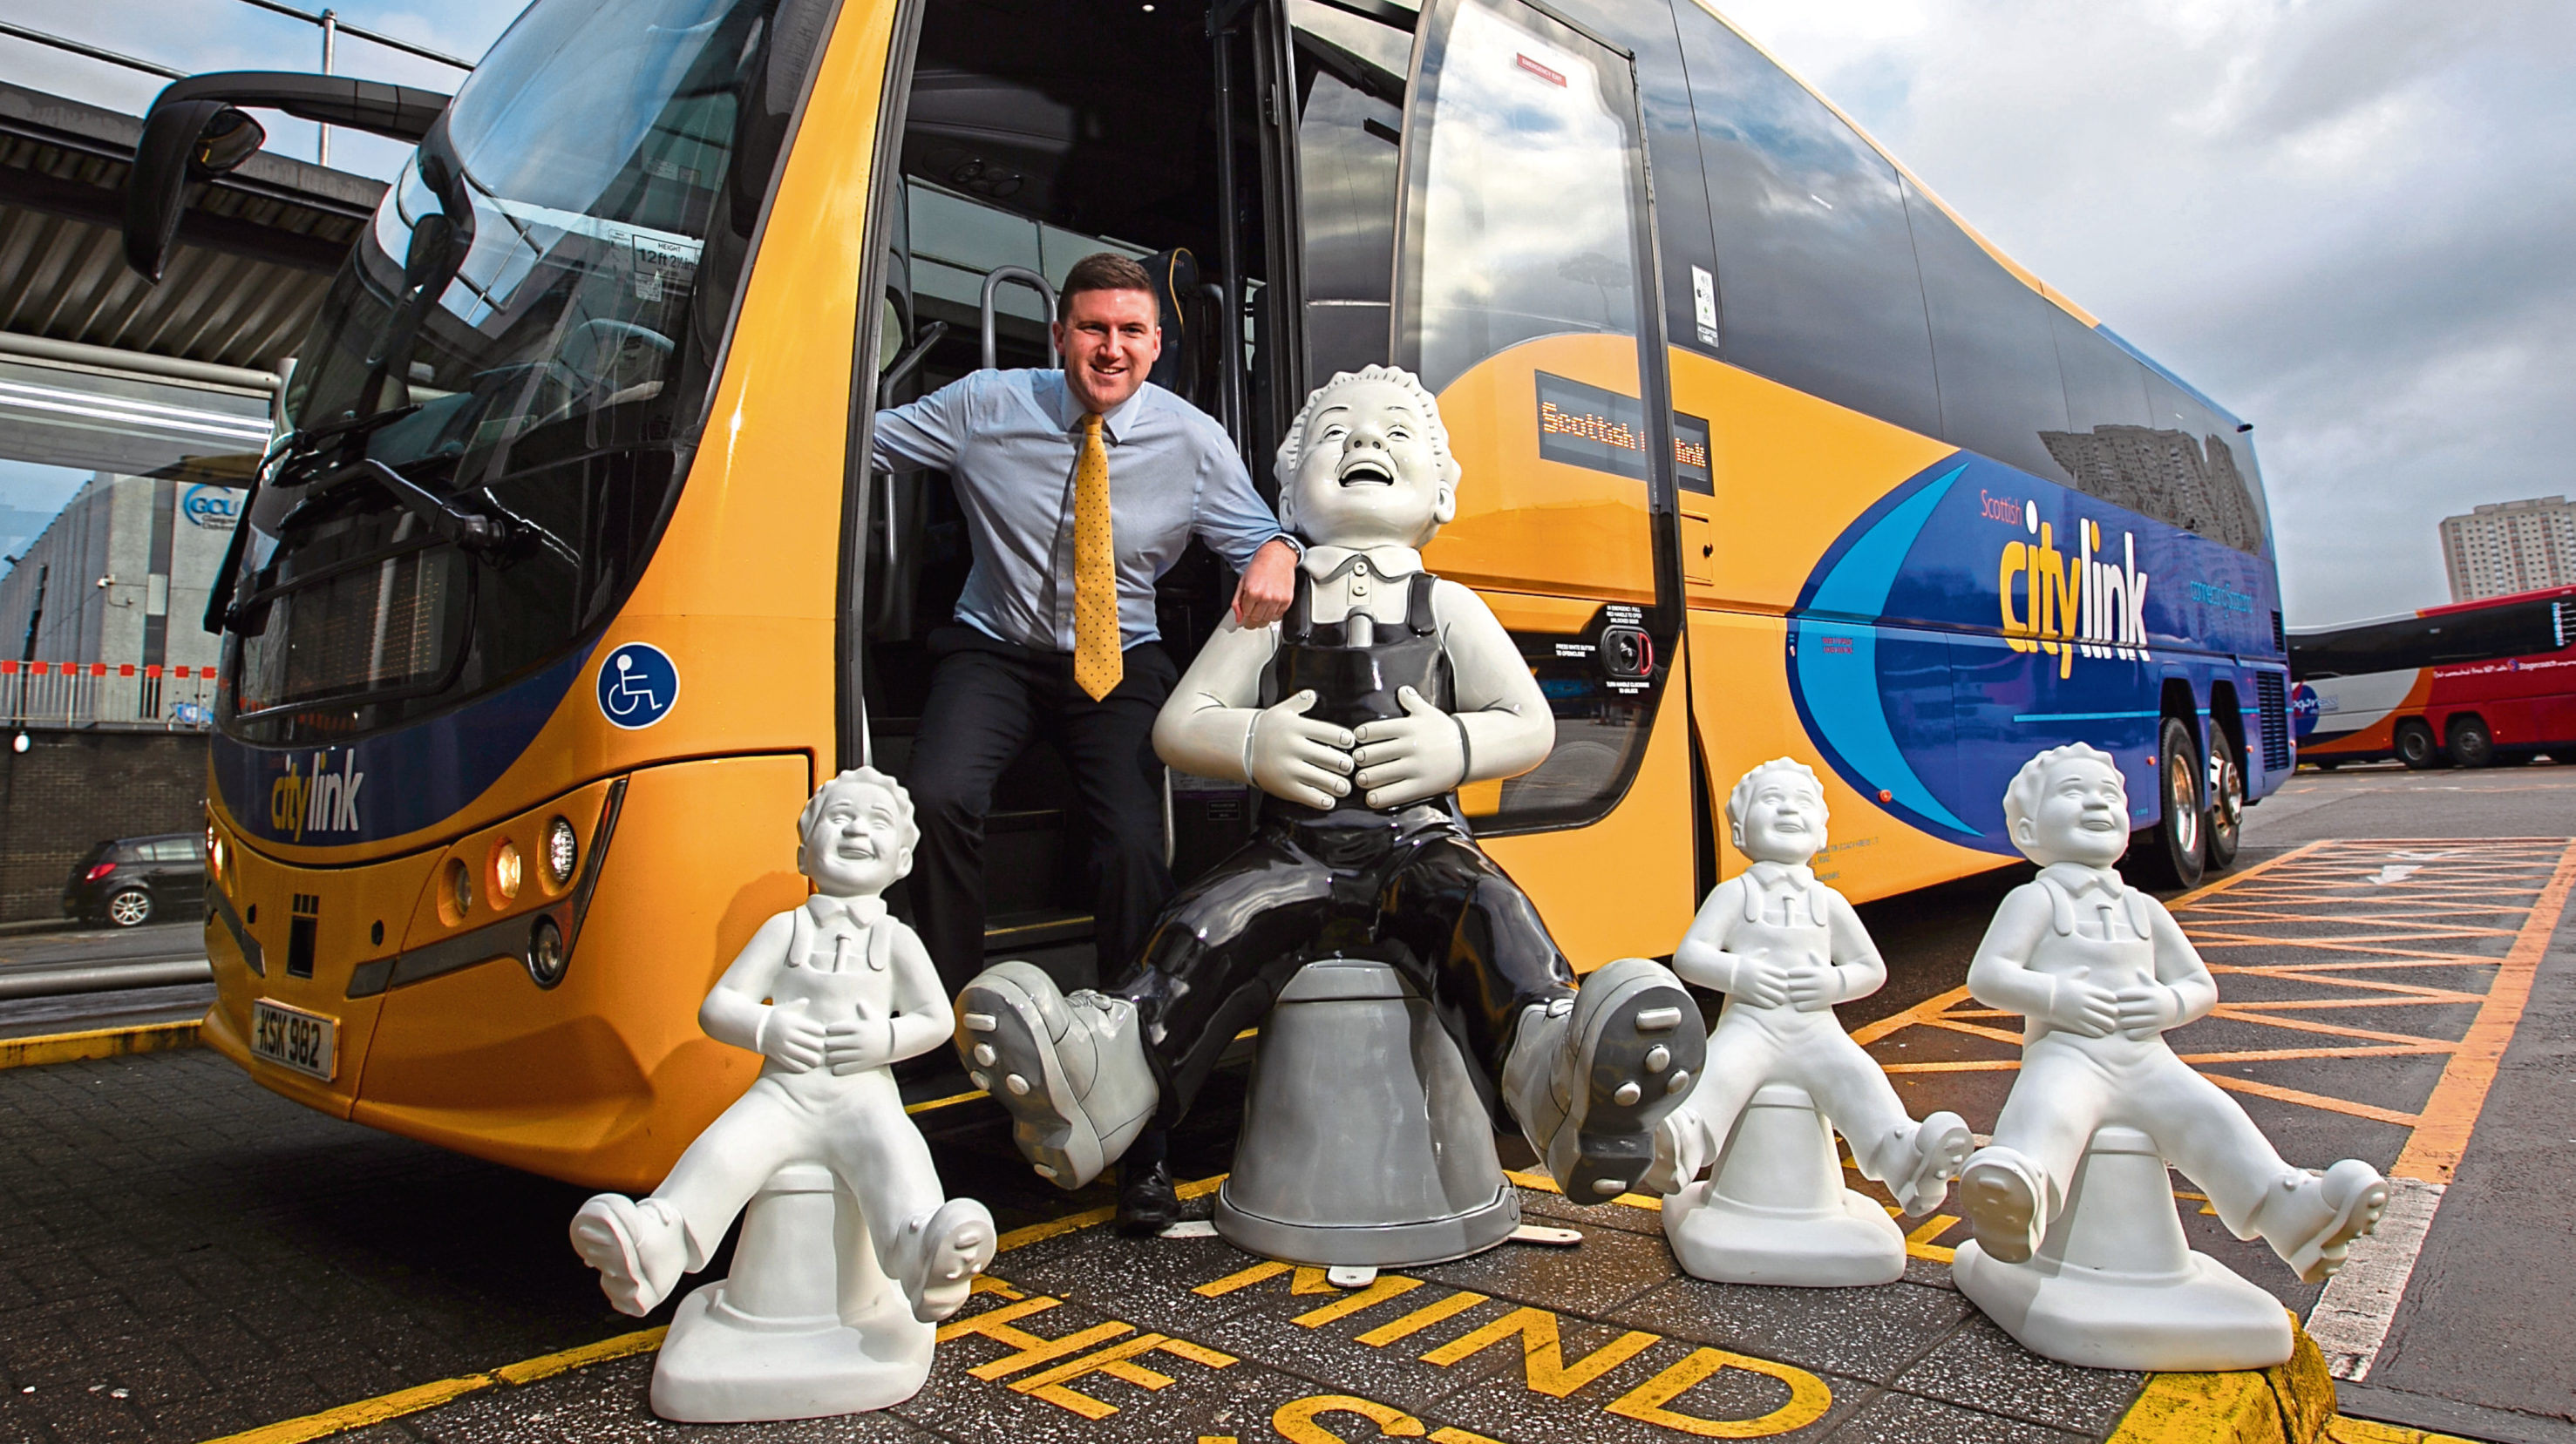 Peter Knight, Operations Director of Citylink buses helps promote the trail (Andrew Cawley / DC Thomson)